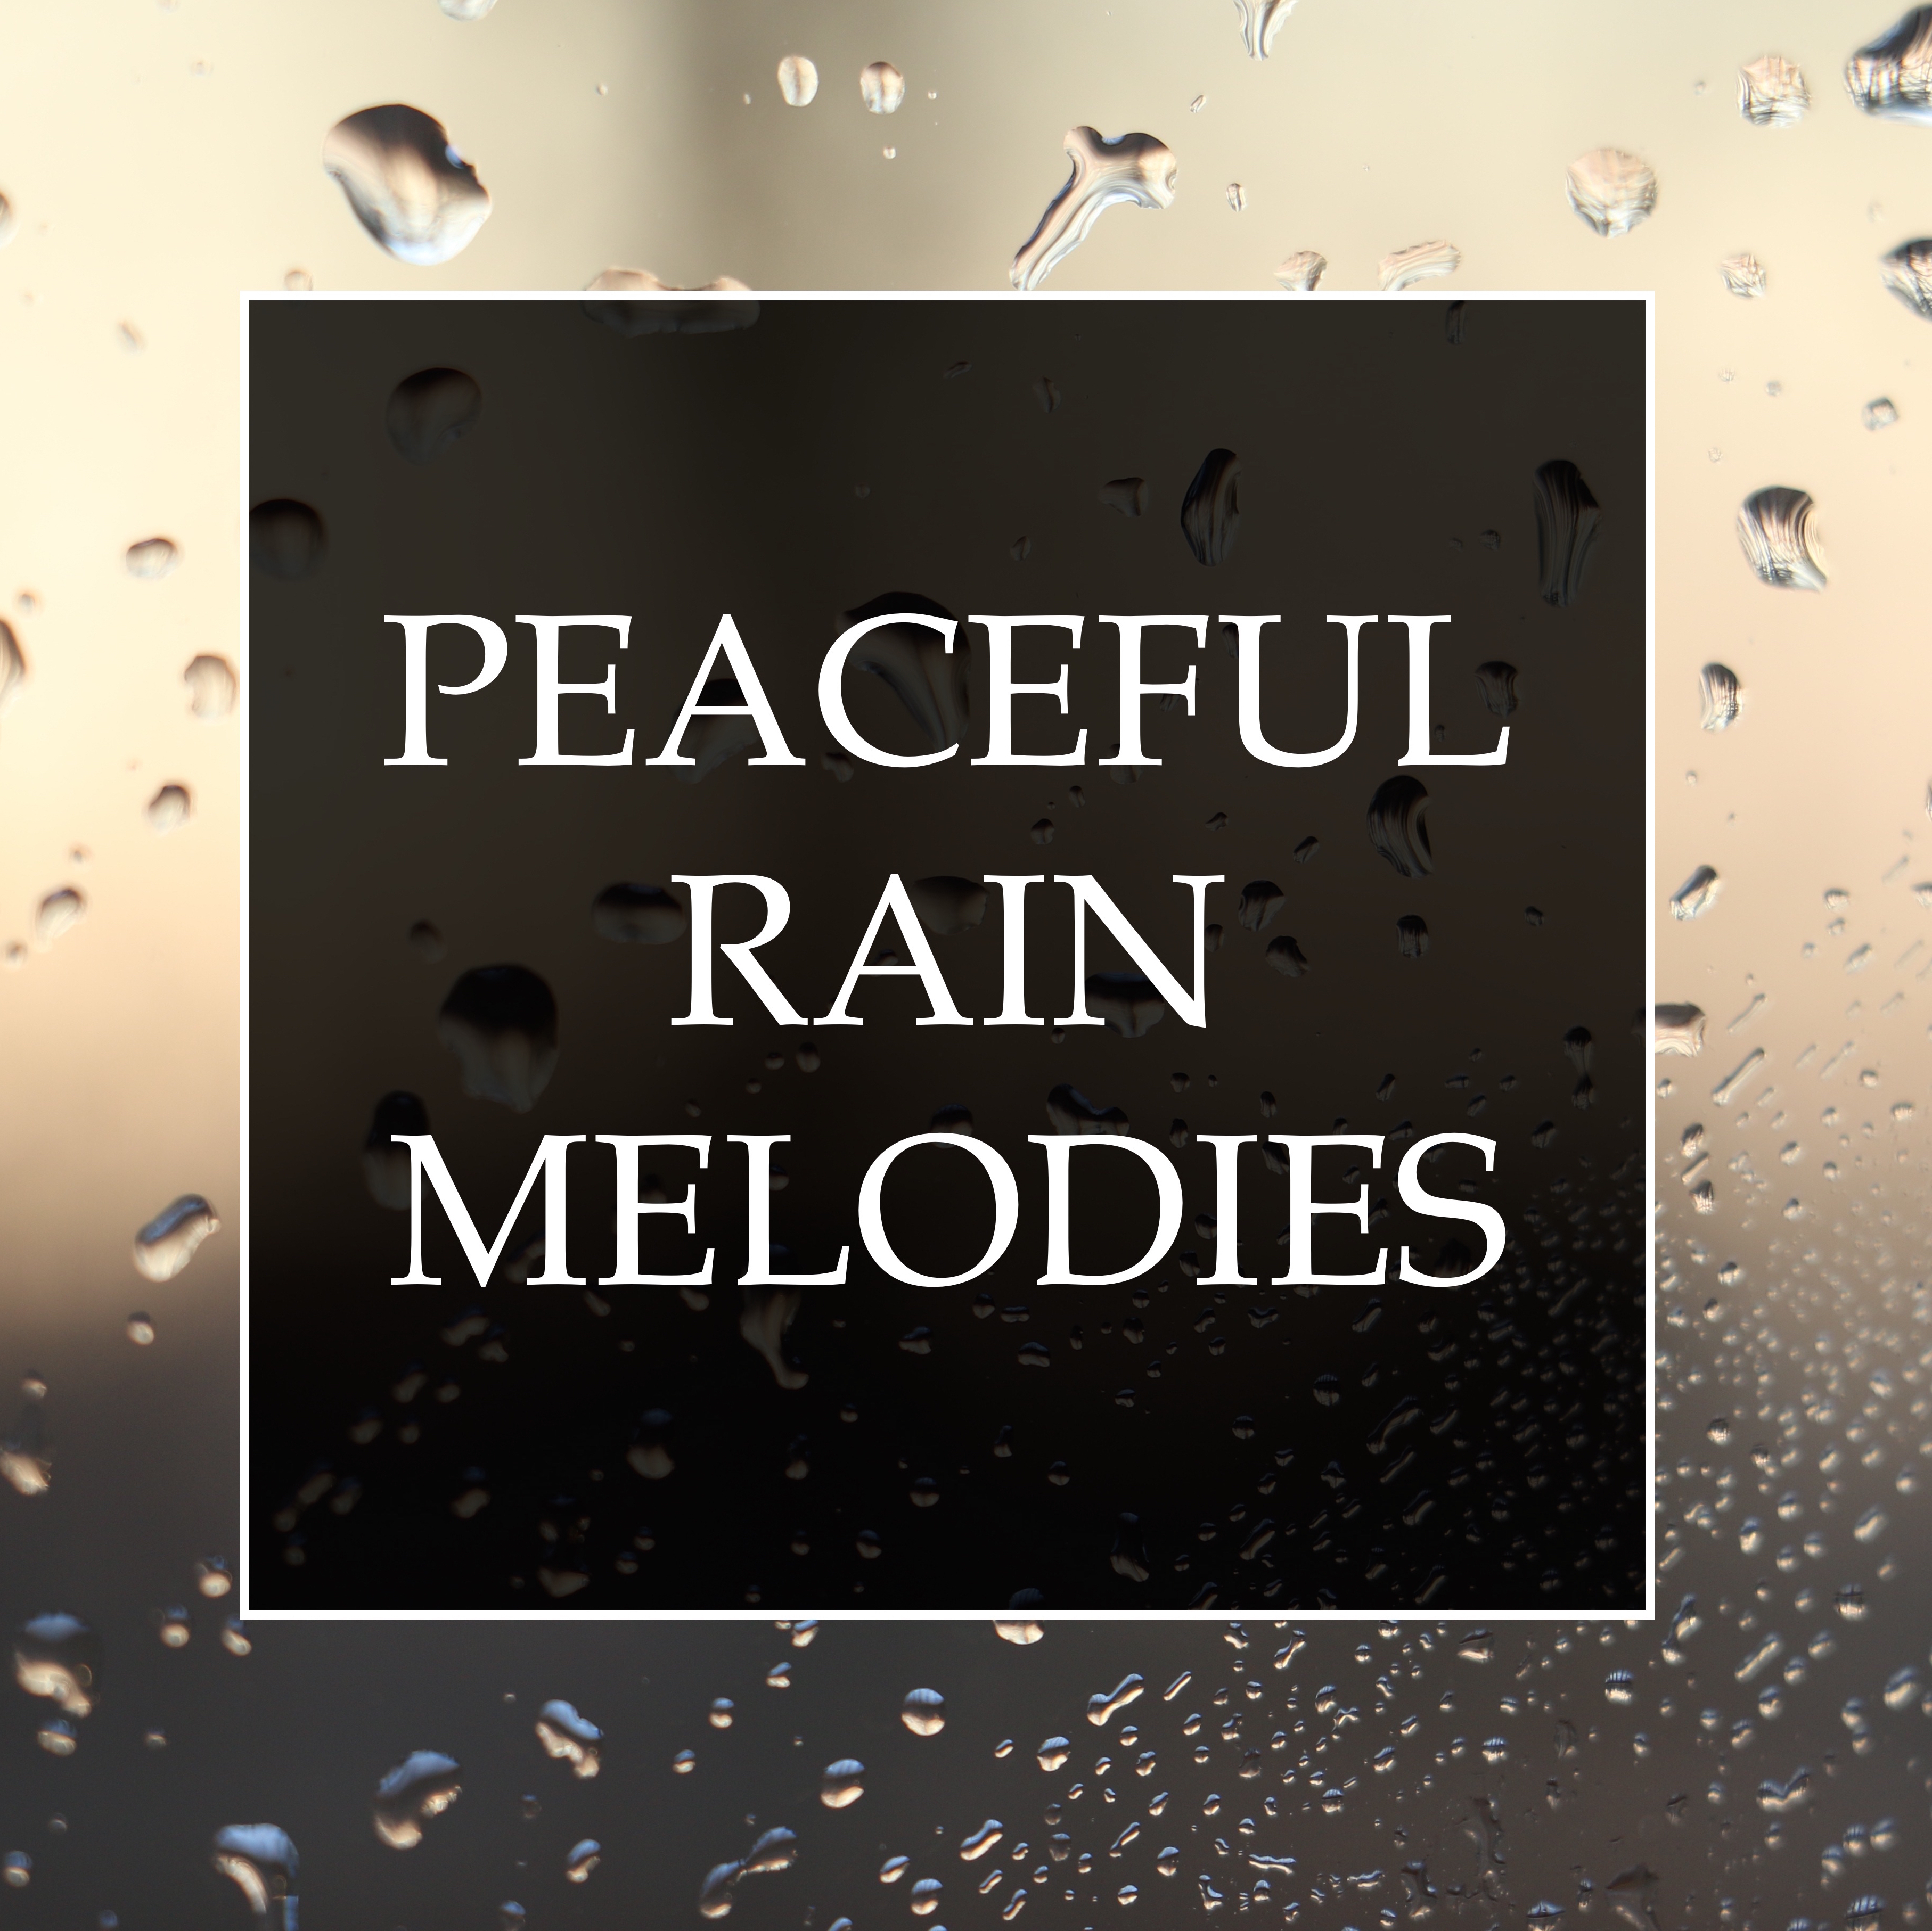 Peaceful Rain Melodies - A Collection of 20 Relaxing Water Melodies for Stress & Anxiety Relief, Better Sleep and Deep Focus